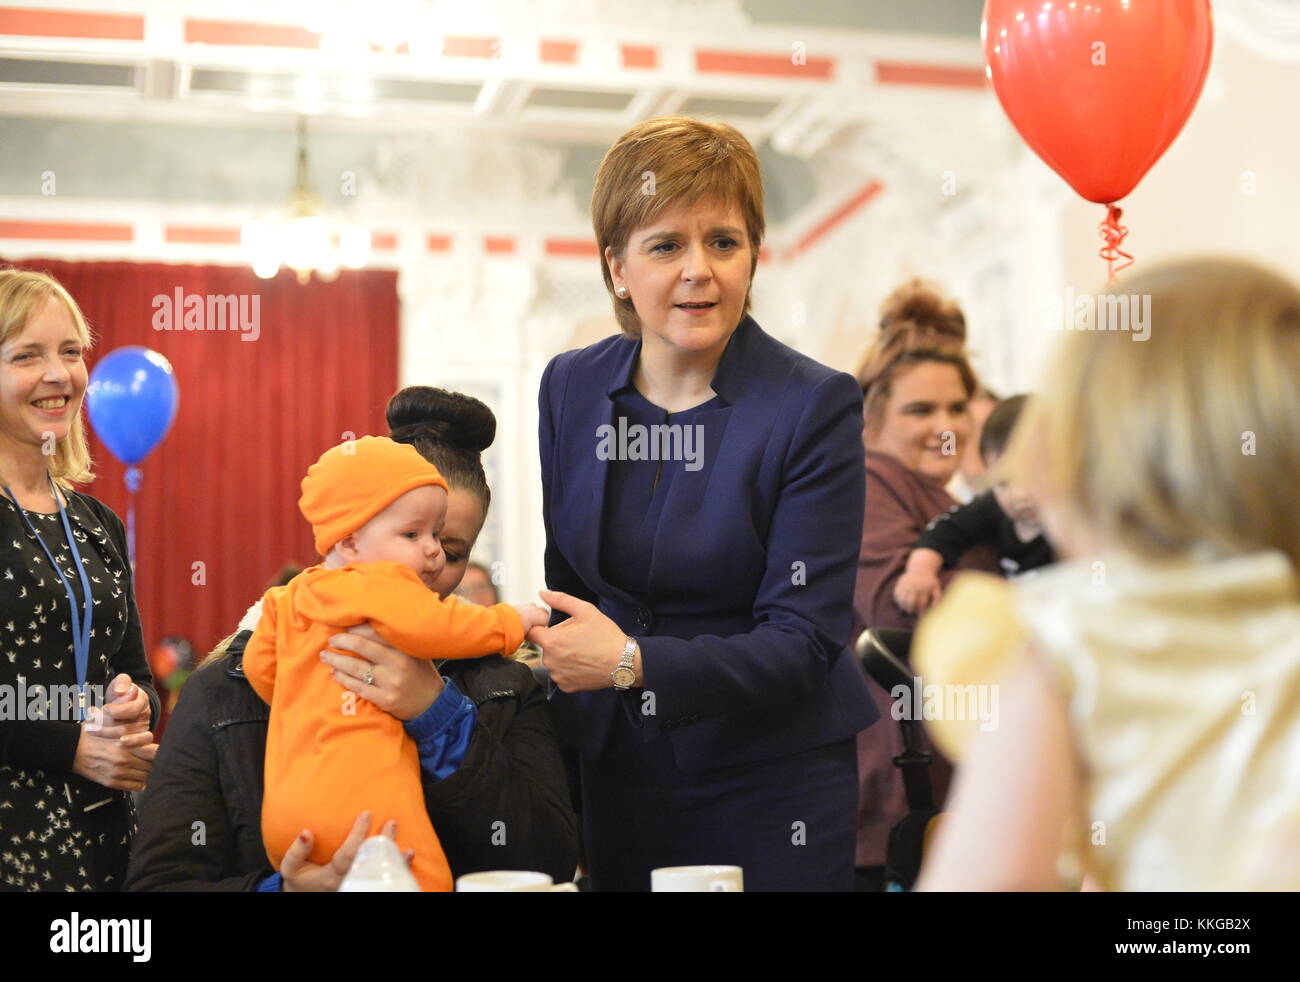 Scotland's First Minister Nicola Sturgeon attends a celebration event to celebrate NHS Tayside having supported more than 1,000 women through Family Nurse Partnership programme at the Caird Hall in Dundee.  Featuring: Nicola Sturgeon Where: Dundee, Scotland, United Kingdom When: 30 Oct 2017 Credit: Euan Cherry/WENN.com Stock Photo